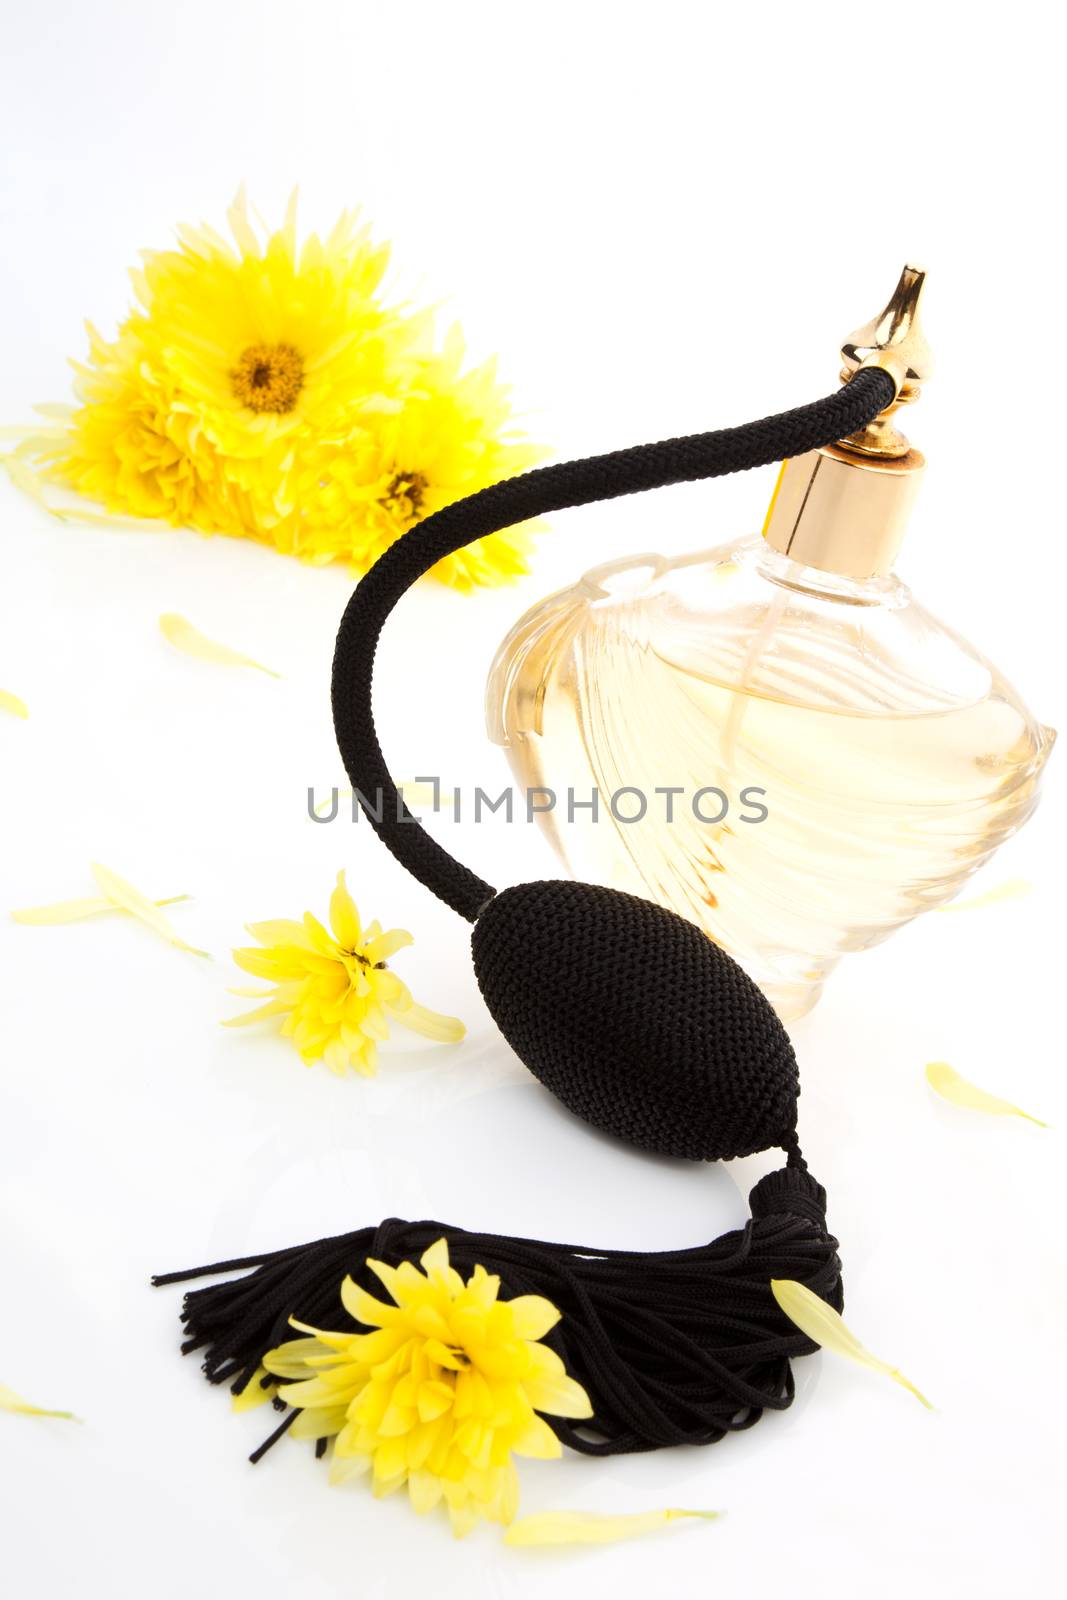 Vintage perfume bottle atomizer with yellow flowers isolated on white background. Feminine beauty concept.